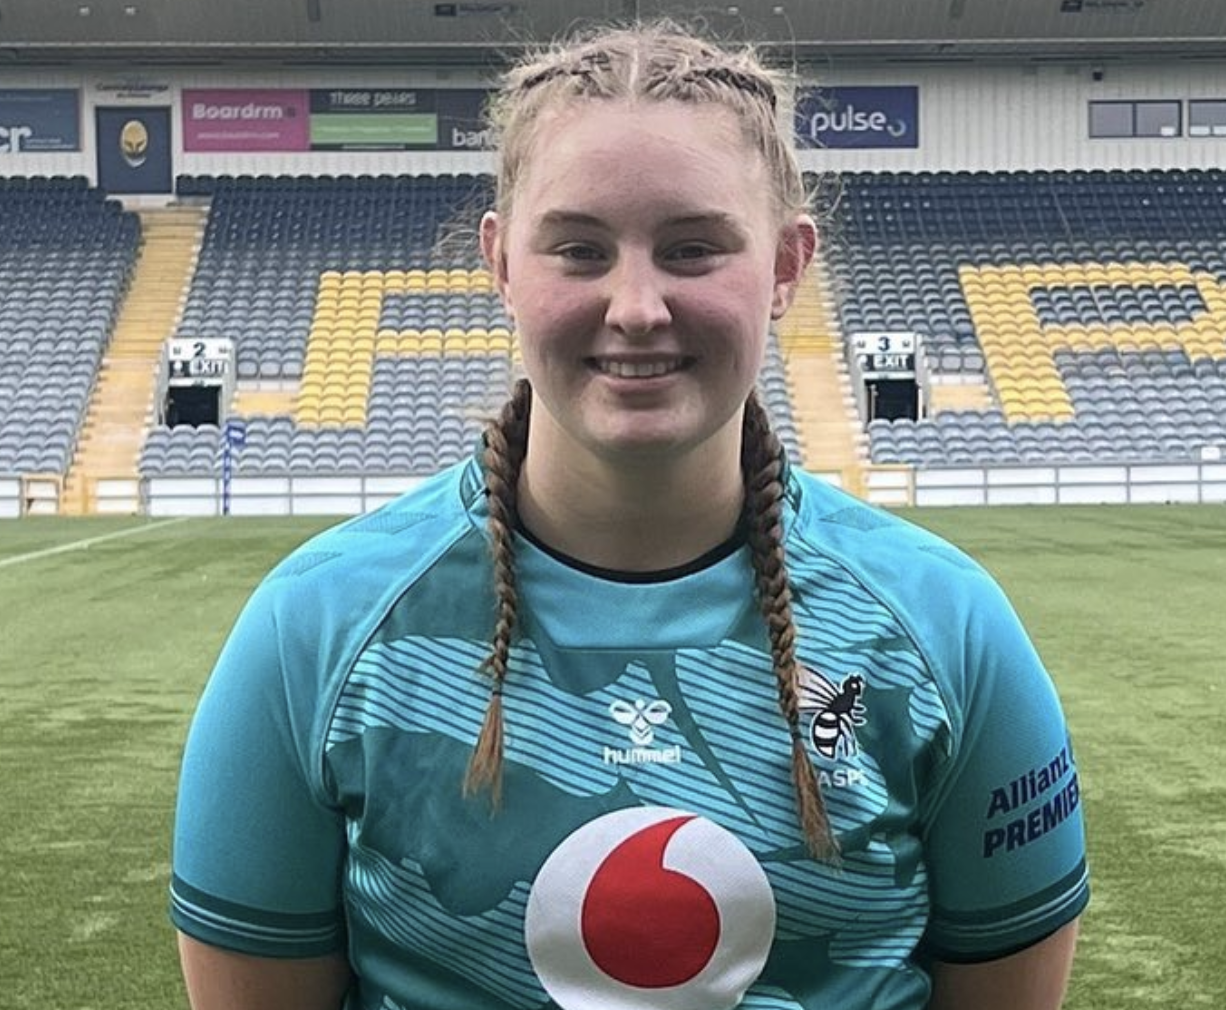 A lady rugby player called Caitlin Clark smiles while wearing a blue sports top